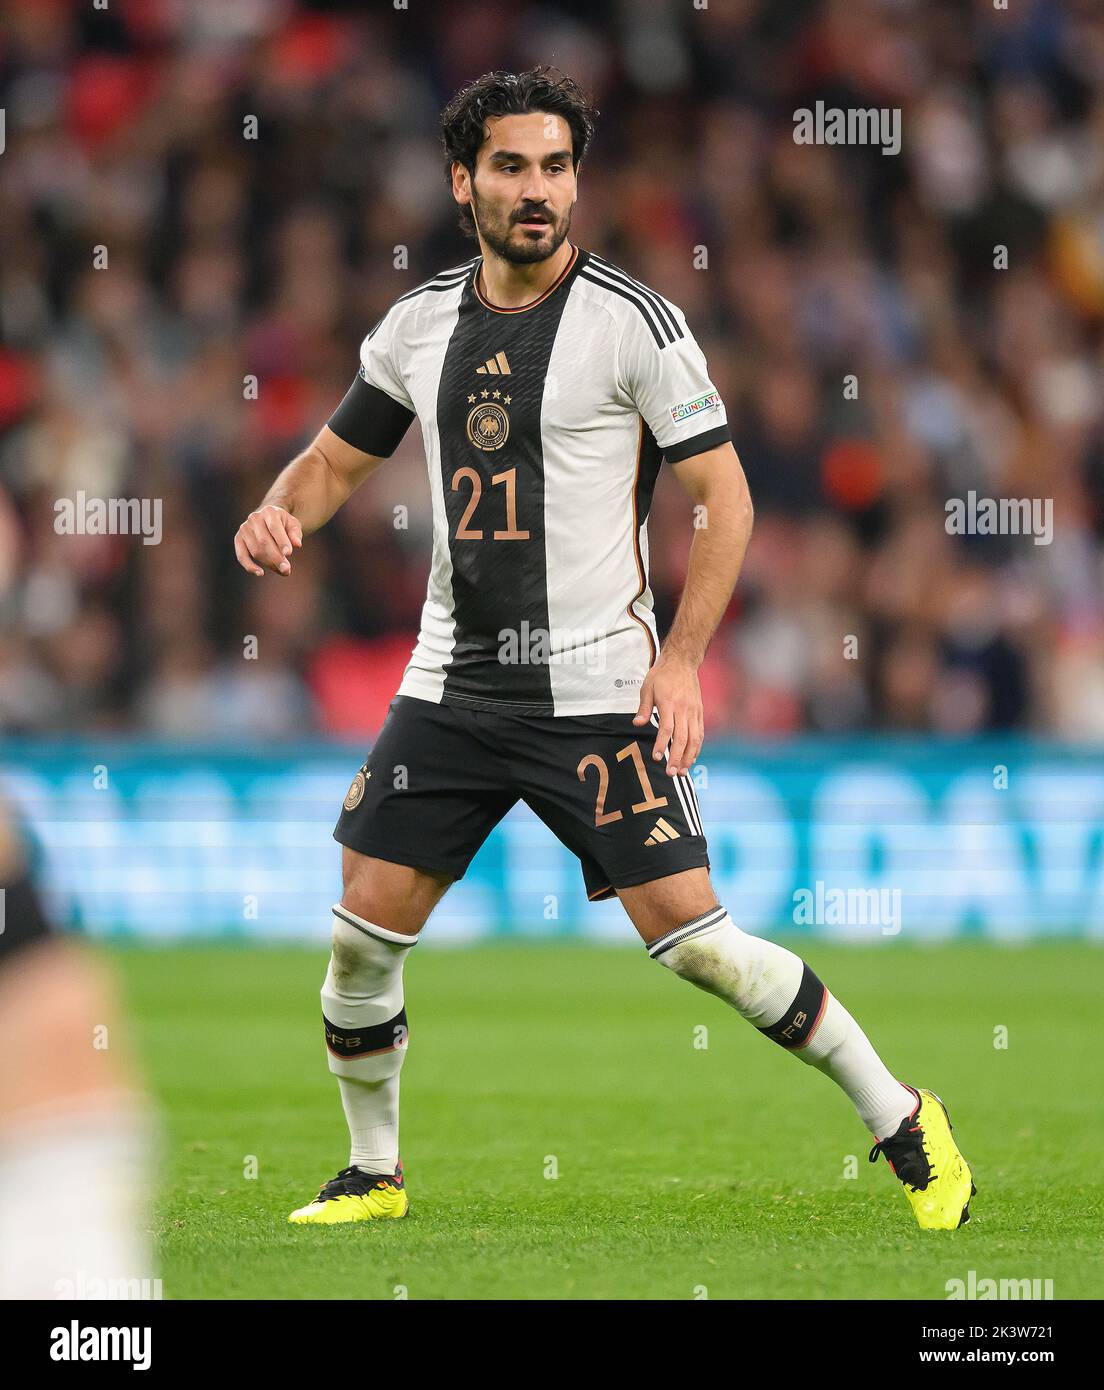 26 Sep 2022 - England v Germany - UEFA Nations League - League A - Group 3 - Wembley Stadium  Germany's Ilkay Gundogan during the UEFA Nations League match against England. Picture : Mark Pain / Alamy Live News Stock Photo